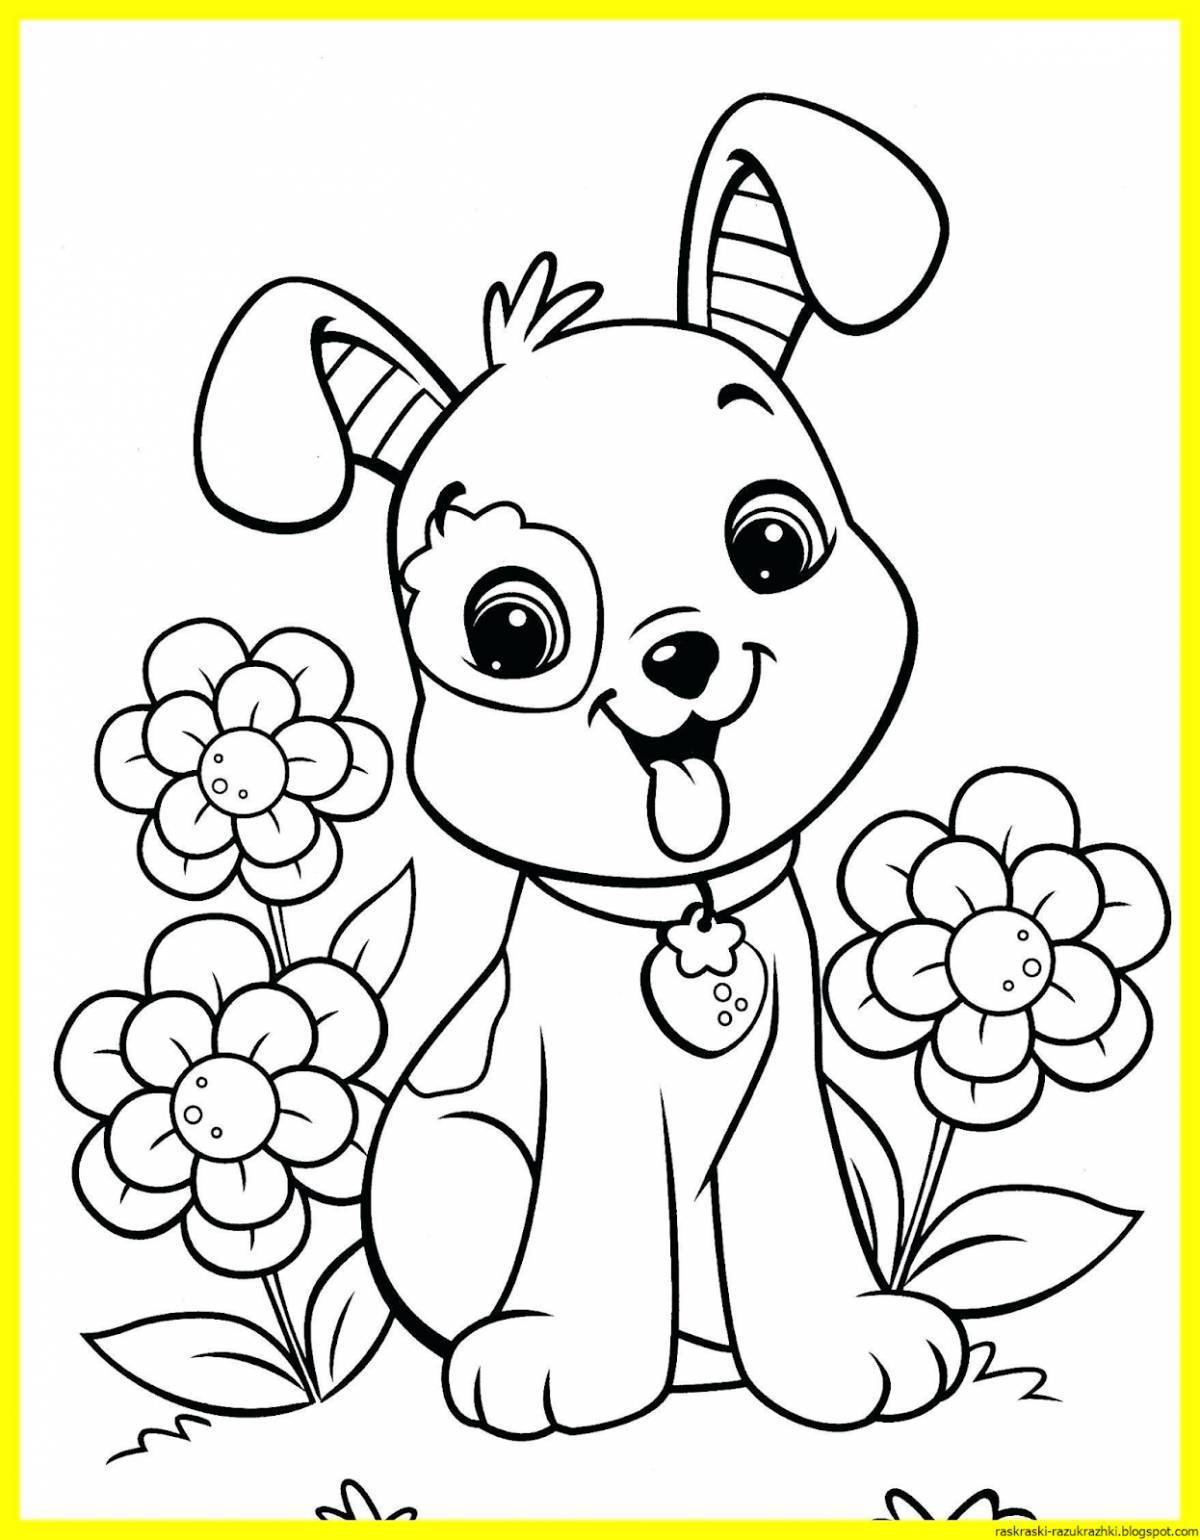 Colorful surprise coloring book for free